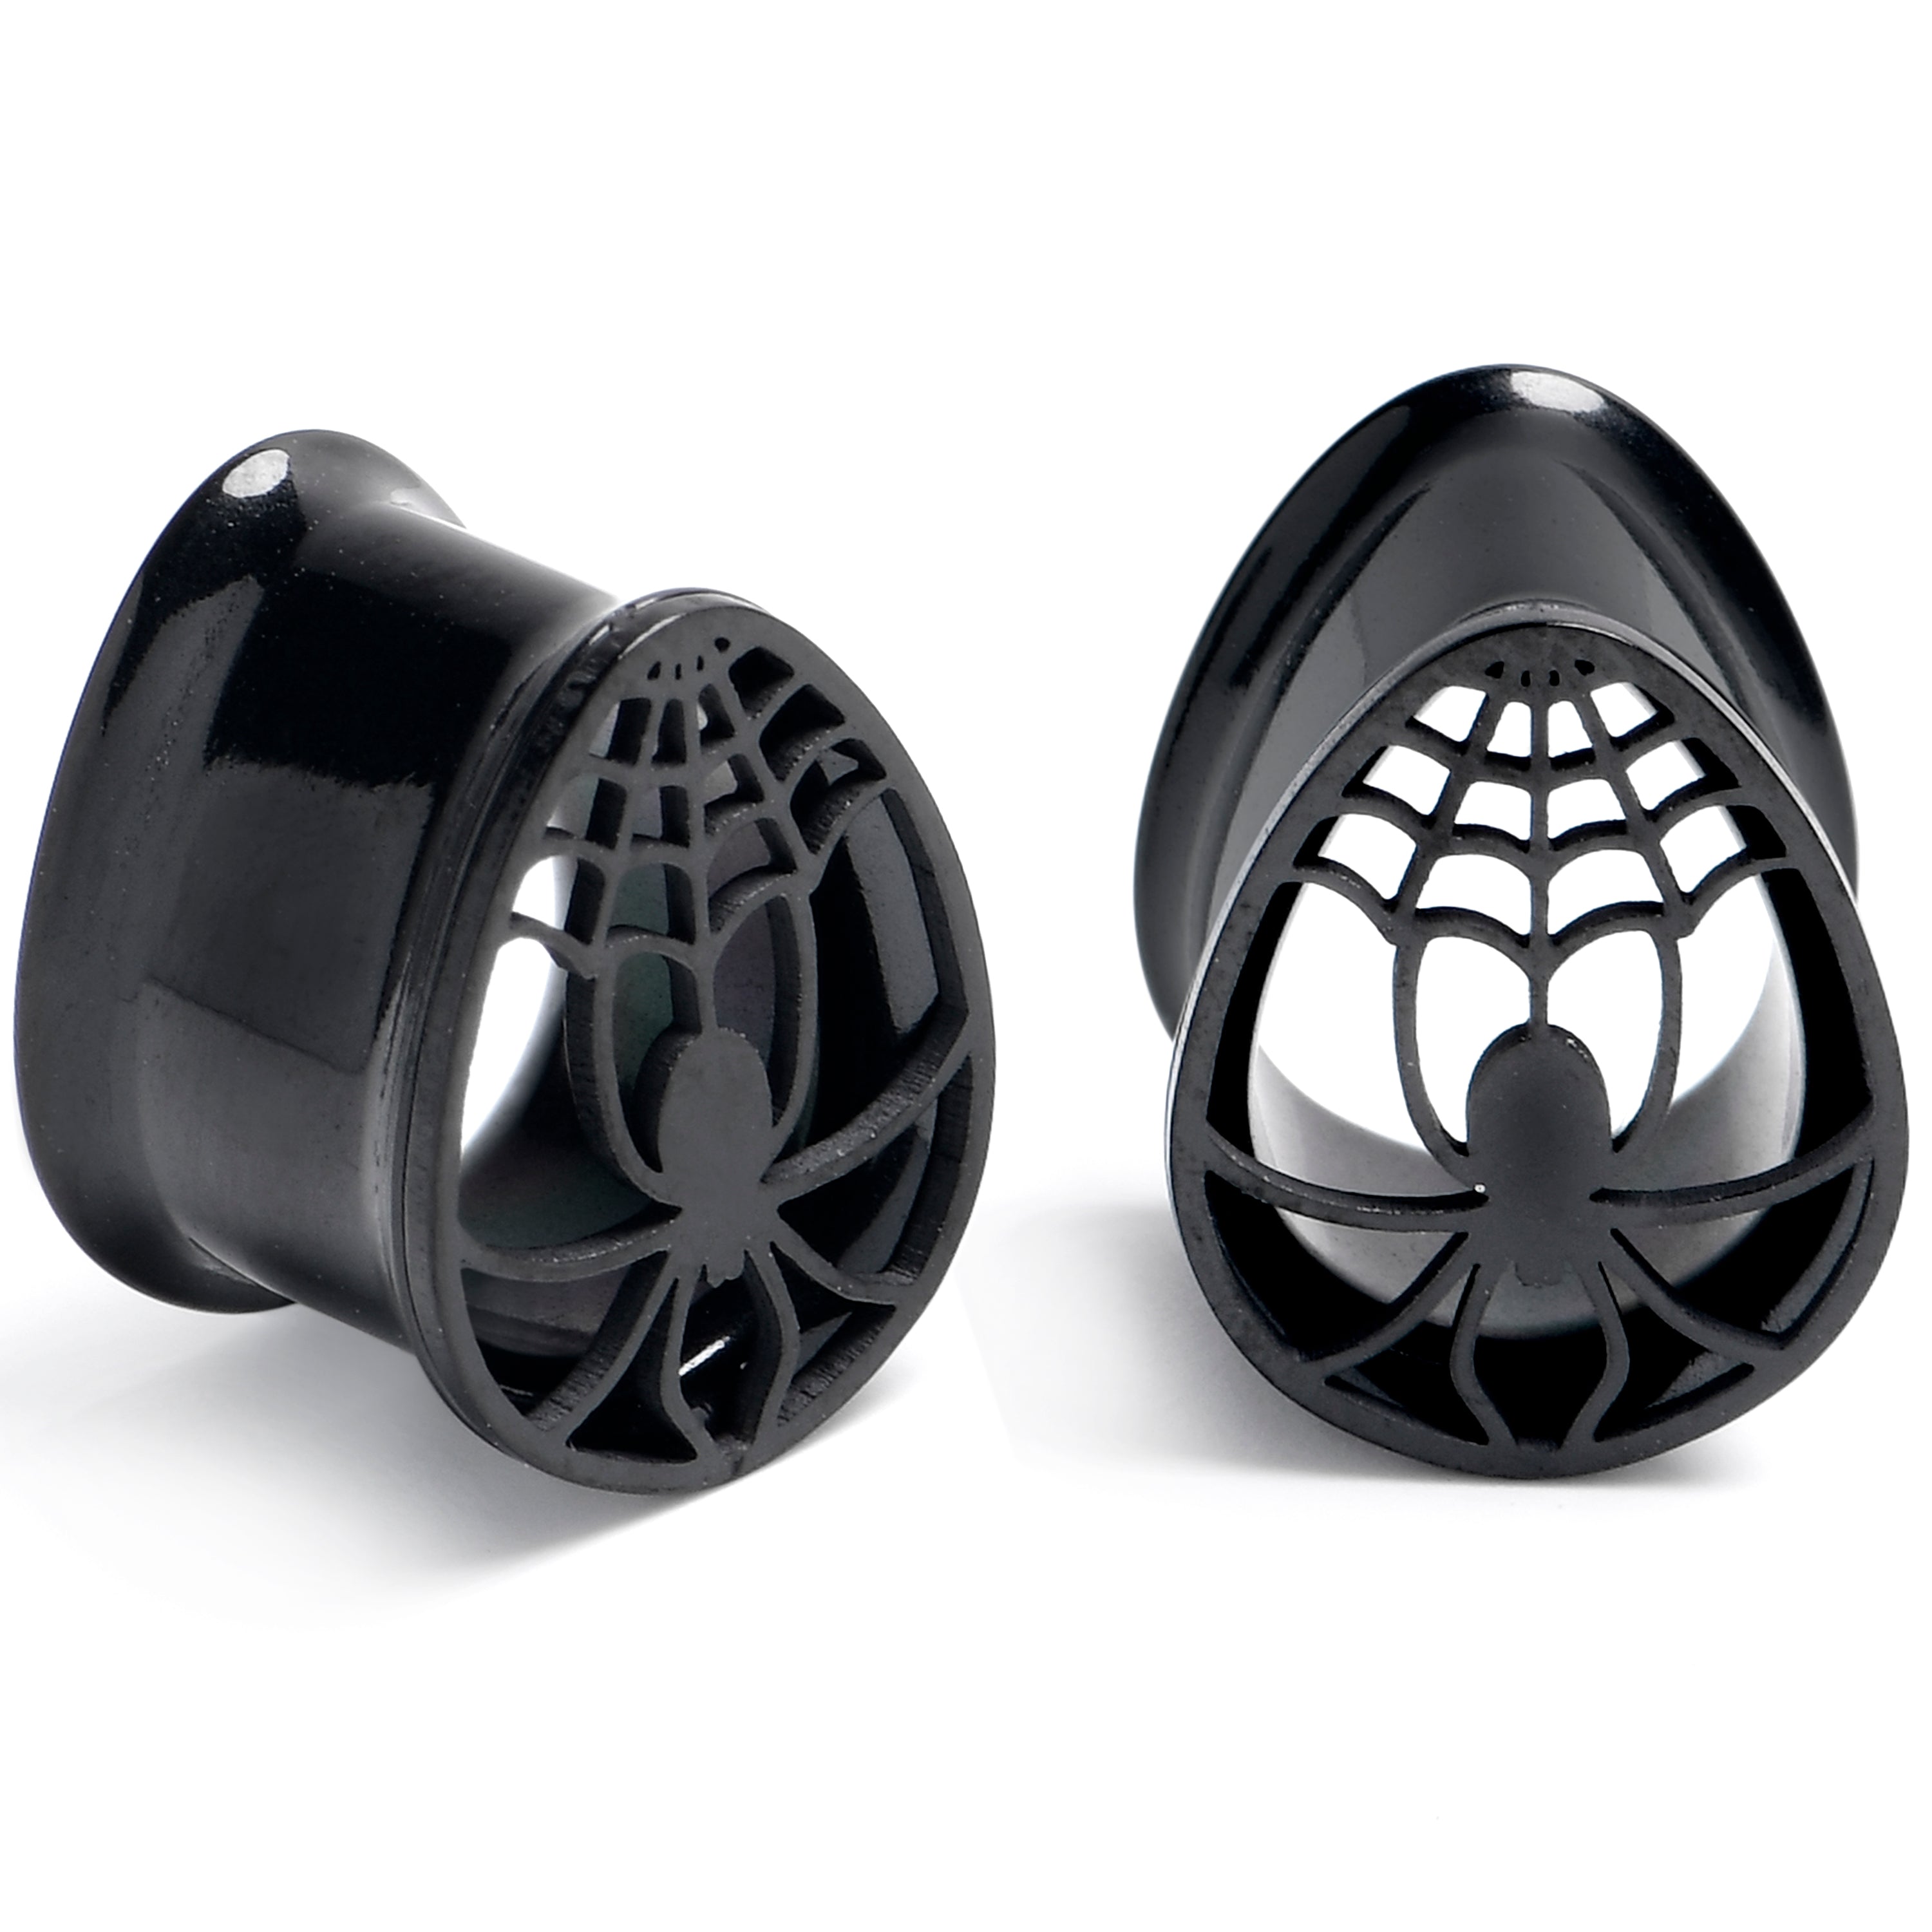 Black Spider Web Double Flare Teardrop Tunnel Plug Set Sizes 8mm to 16mm